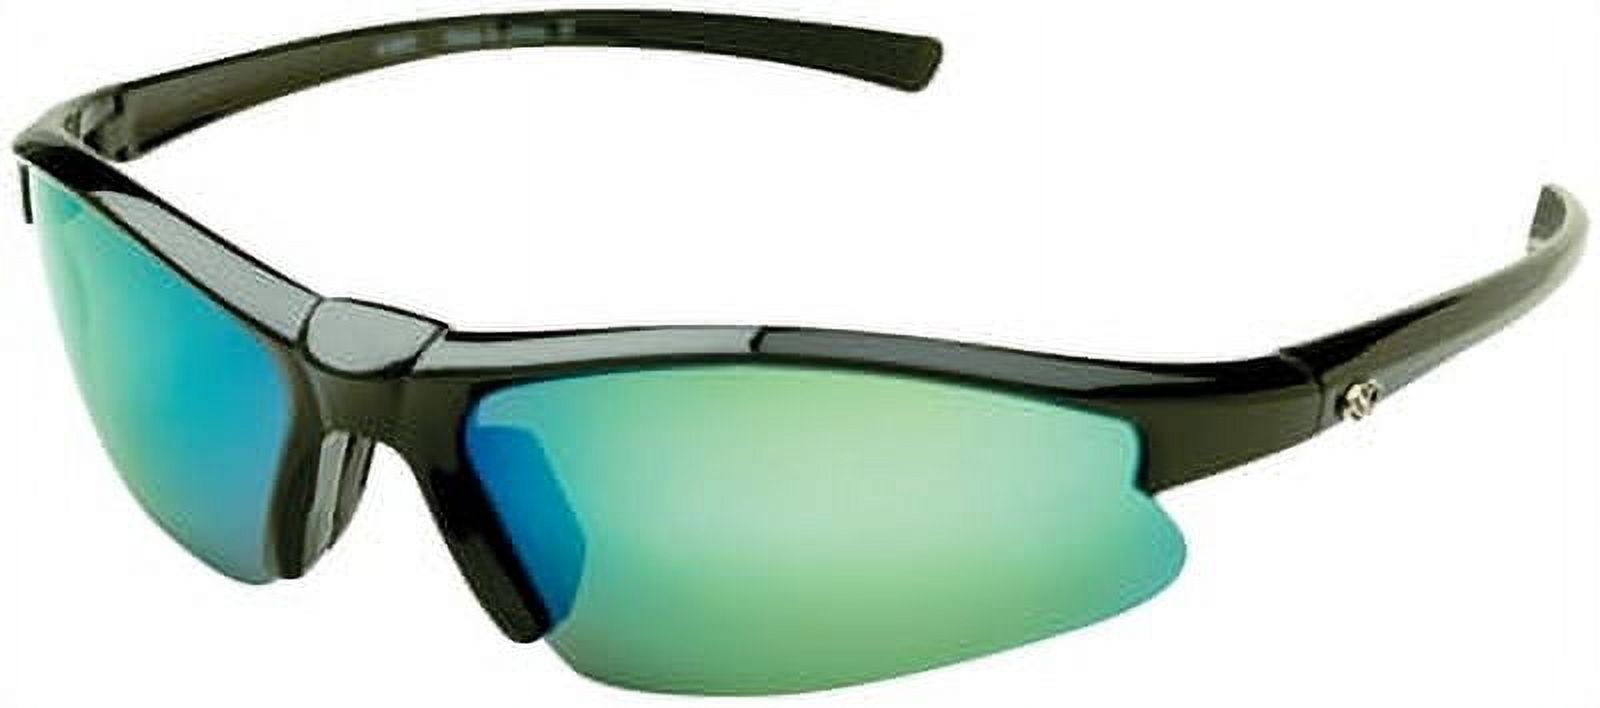 Yachter's Choice Tarpon Sunglasses with Polarized Lenses - image 1 of 1